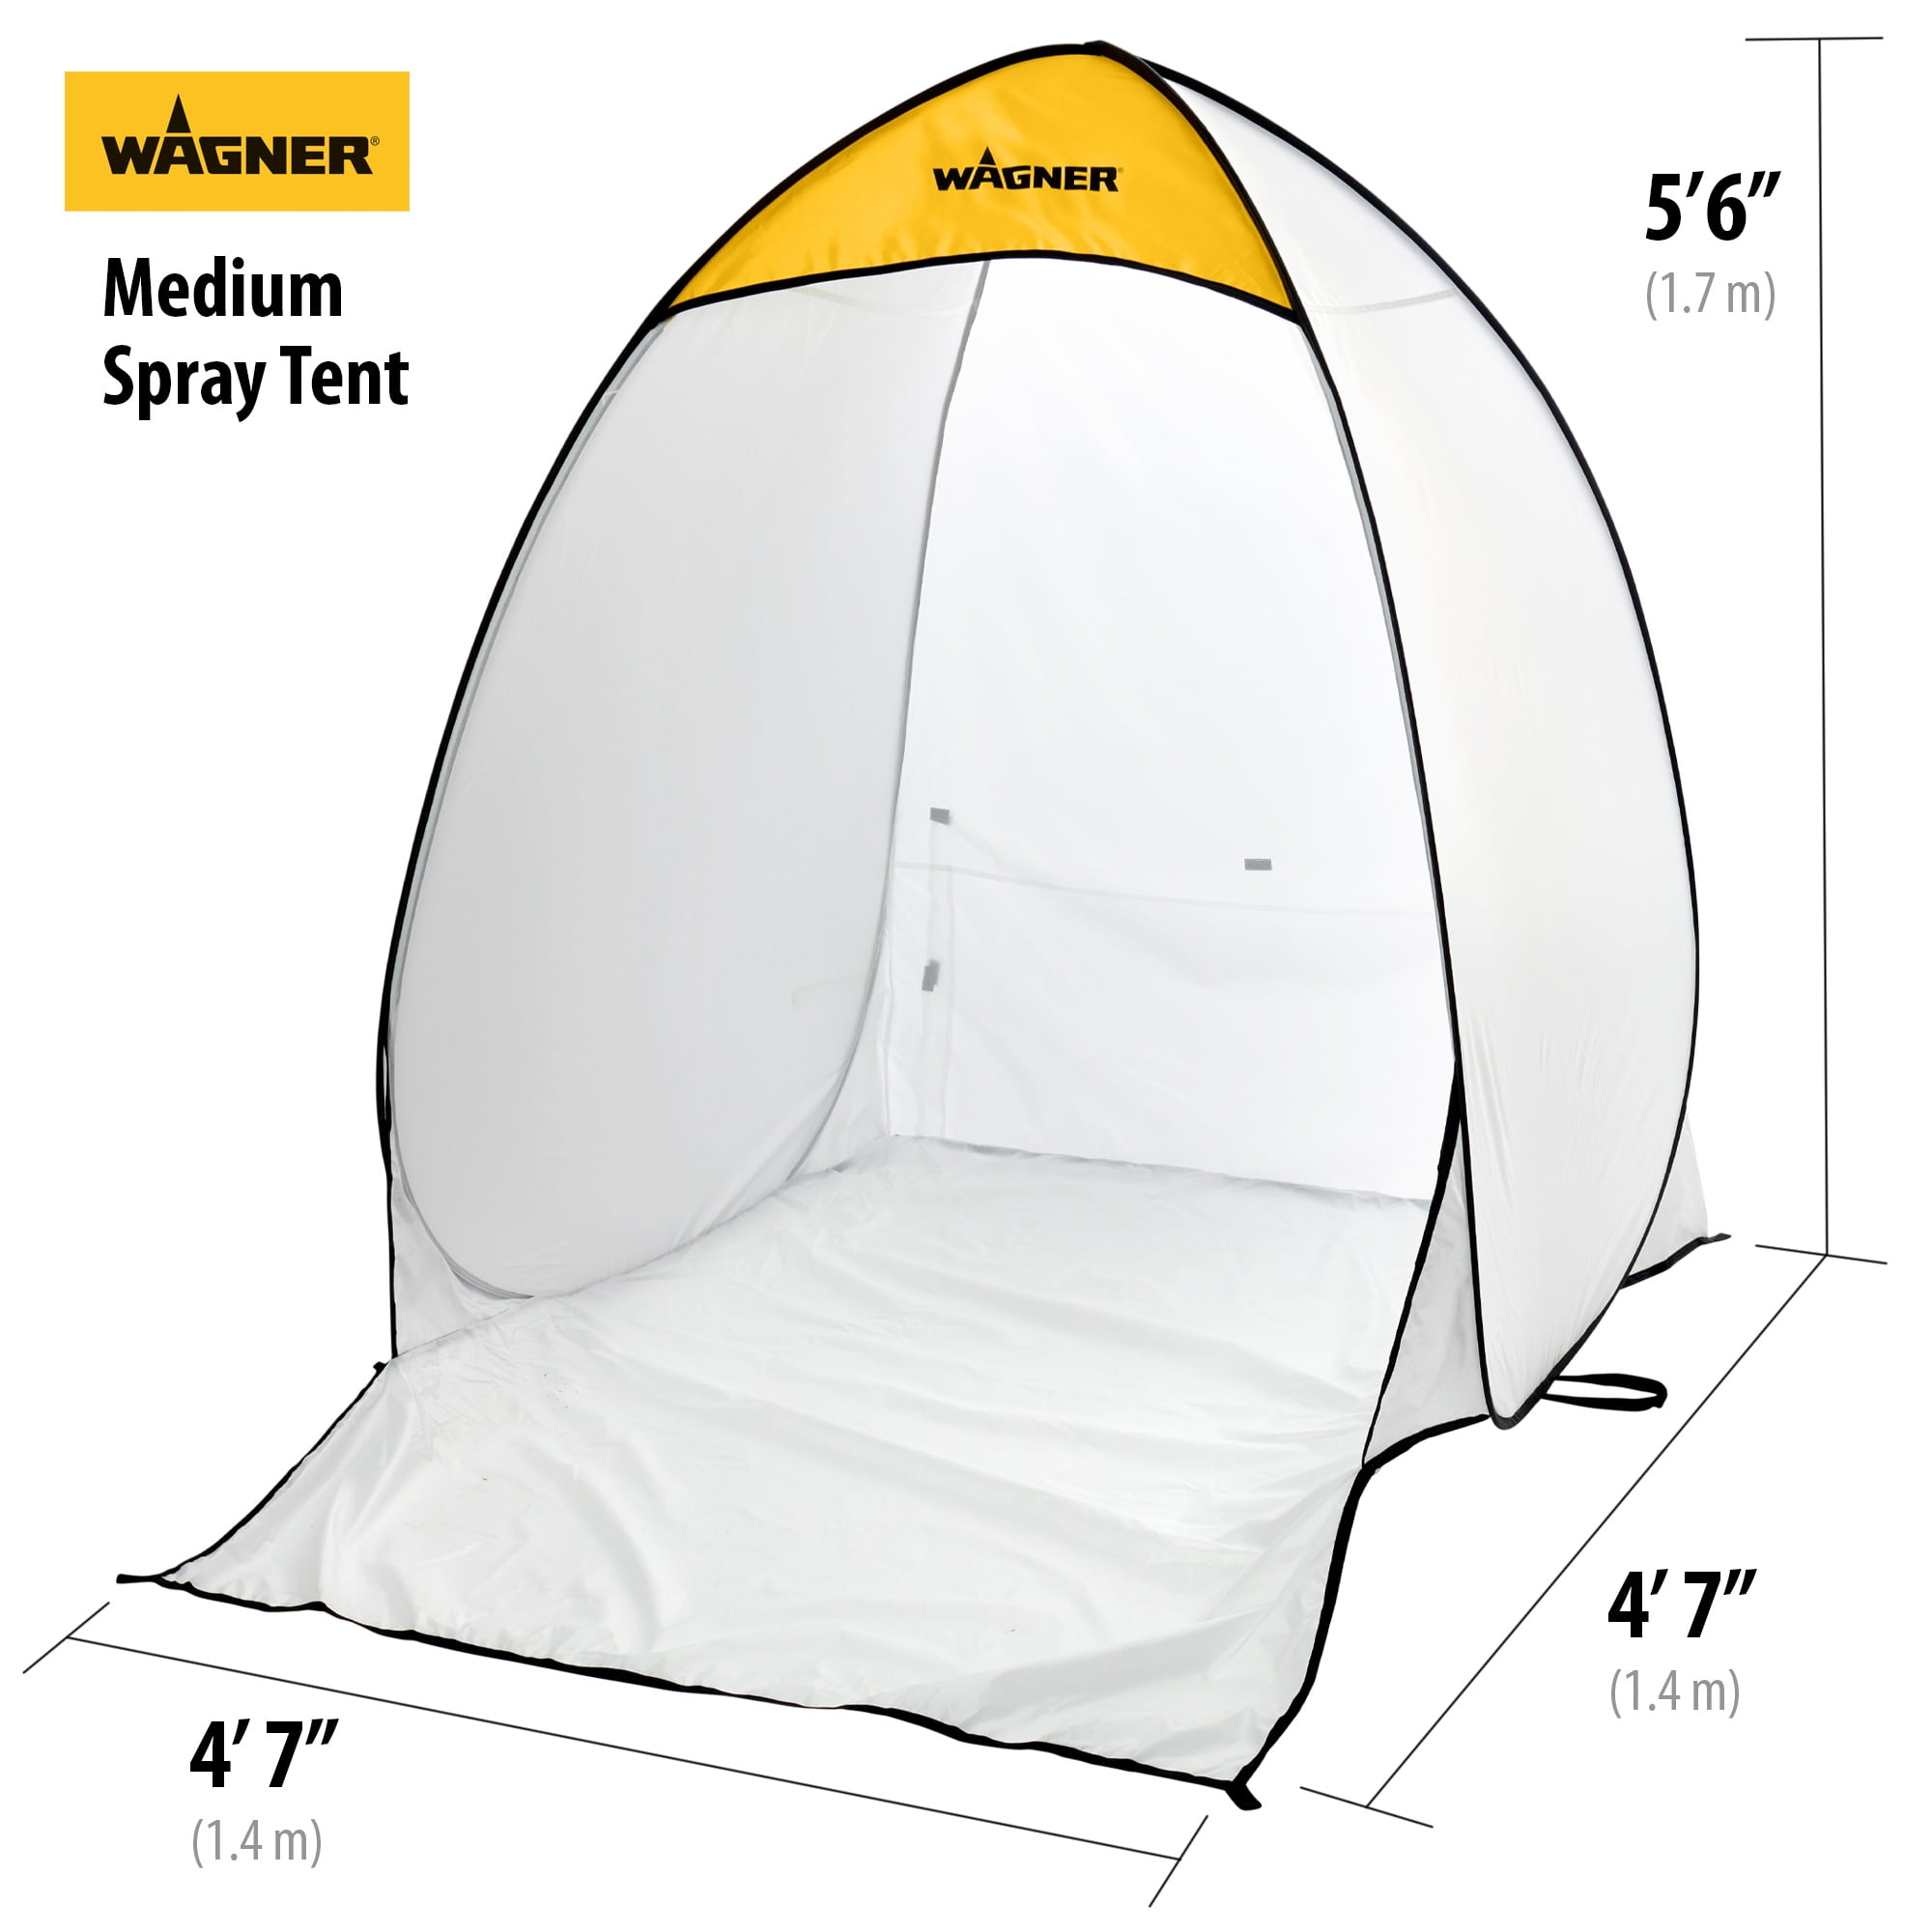  PLANTIONAL Portable Paint Tent for Spray Painting